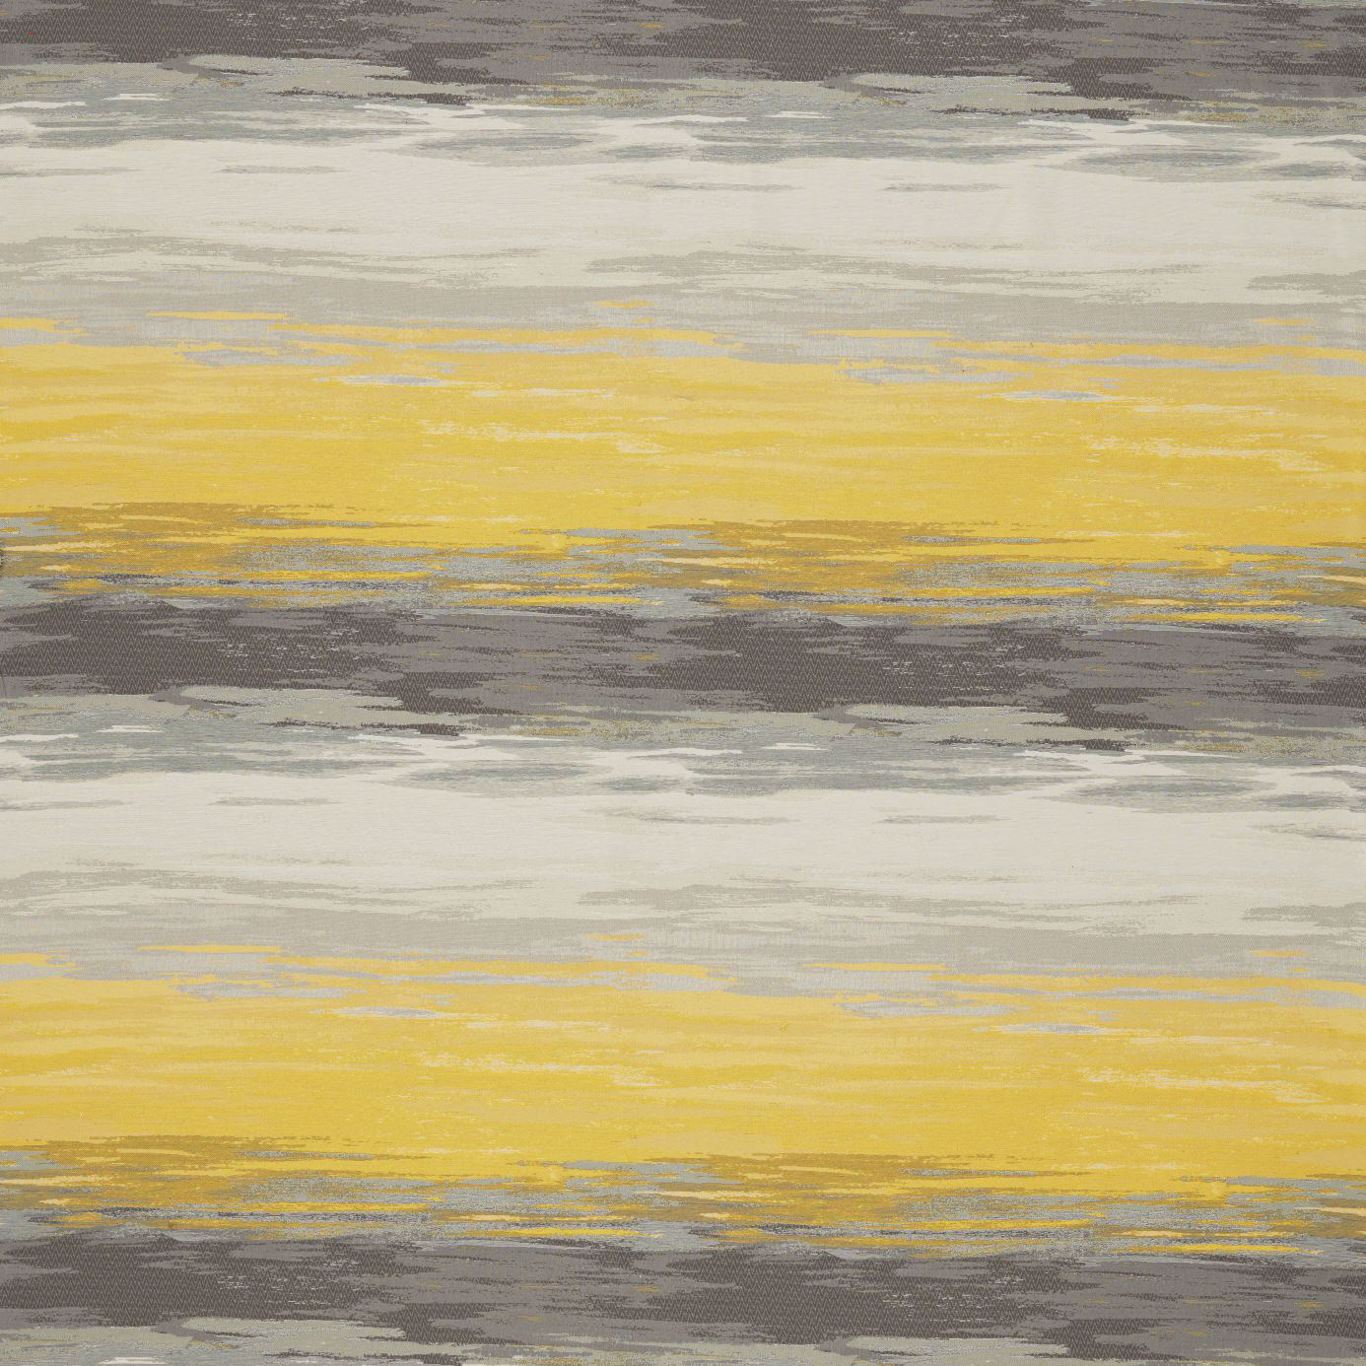 Chroma Fabric by Harlequin - HFAU131852 - Zest / Charcoal / Silver